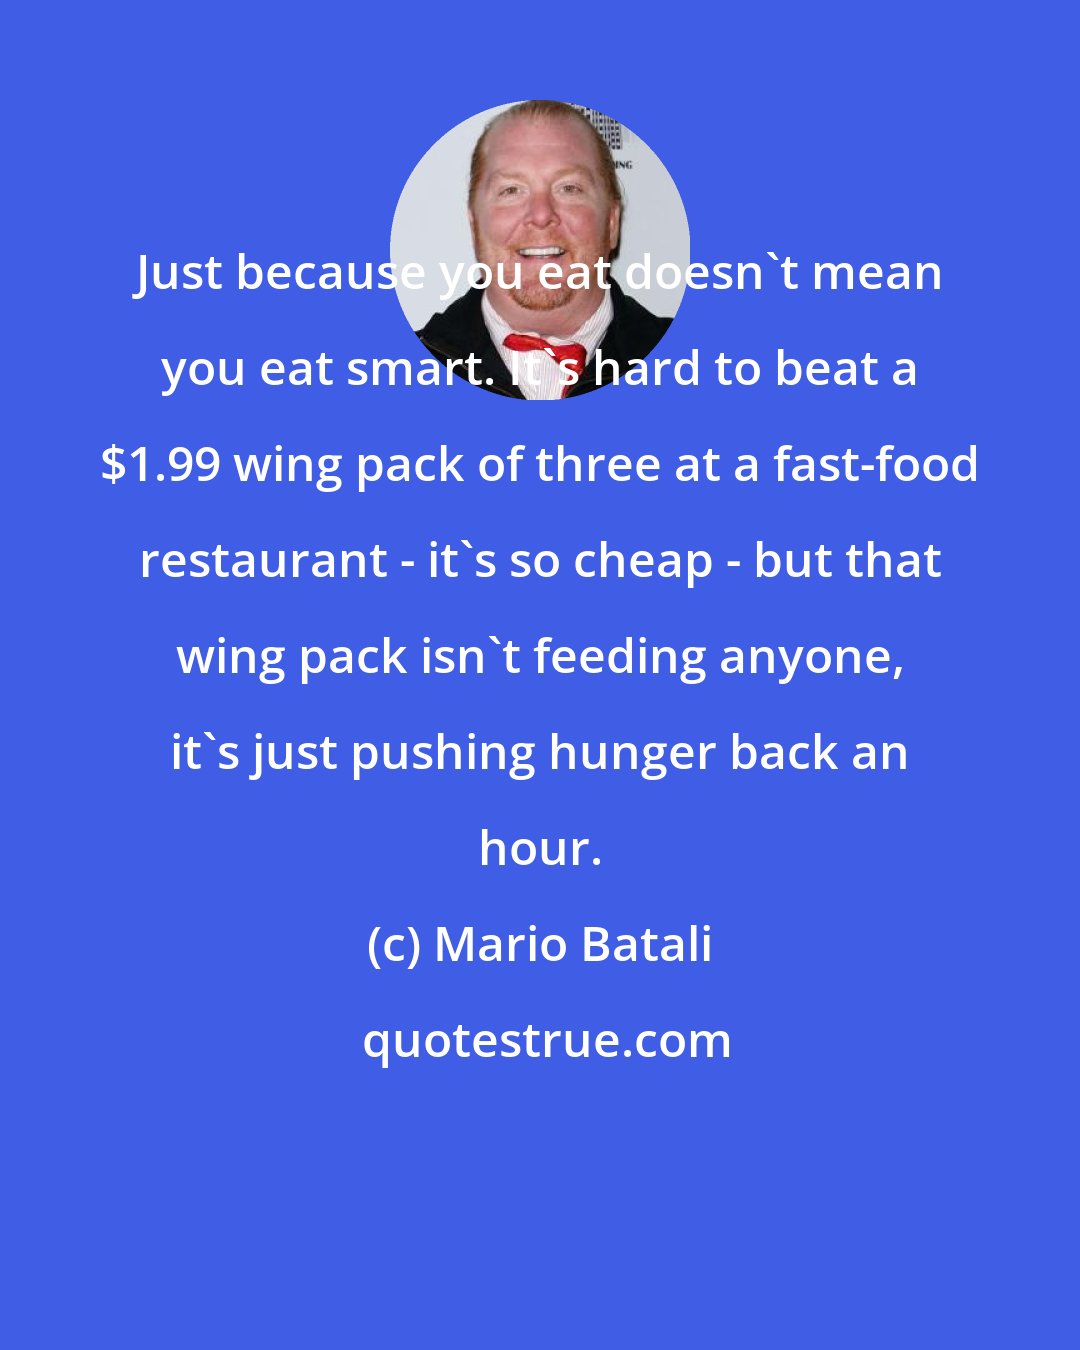 Mario Batali: Just because you eat doesn't mean you eat smart. It's hard to beat a $1.99 wing pack of three at a fast-food restaurant - it's so cheap - but that wing pack isn't feeding anyone, it's just pushing hunger back an hour.